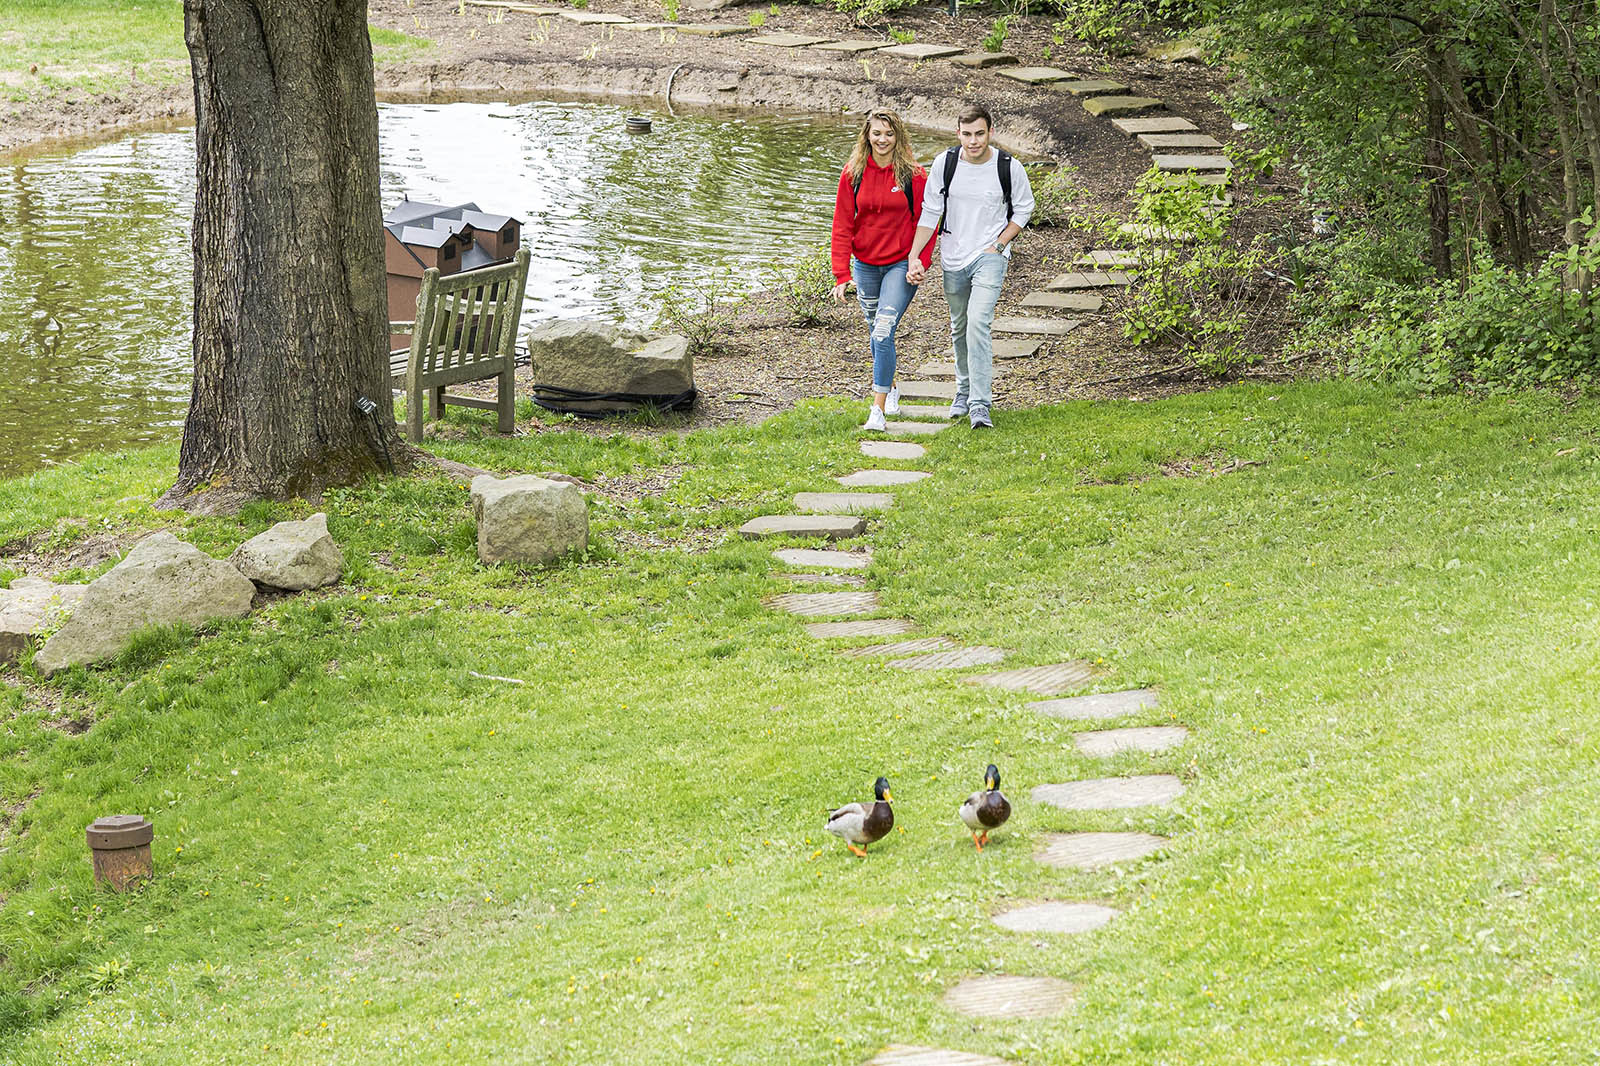 Photo of a young man and woman holding hands, walking along a path by a pond. There are trees and foliage surrounding them.